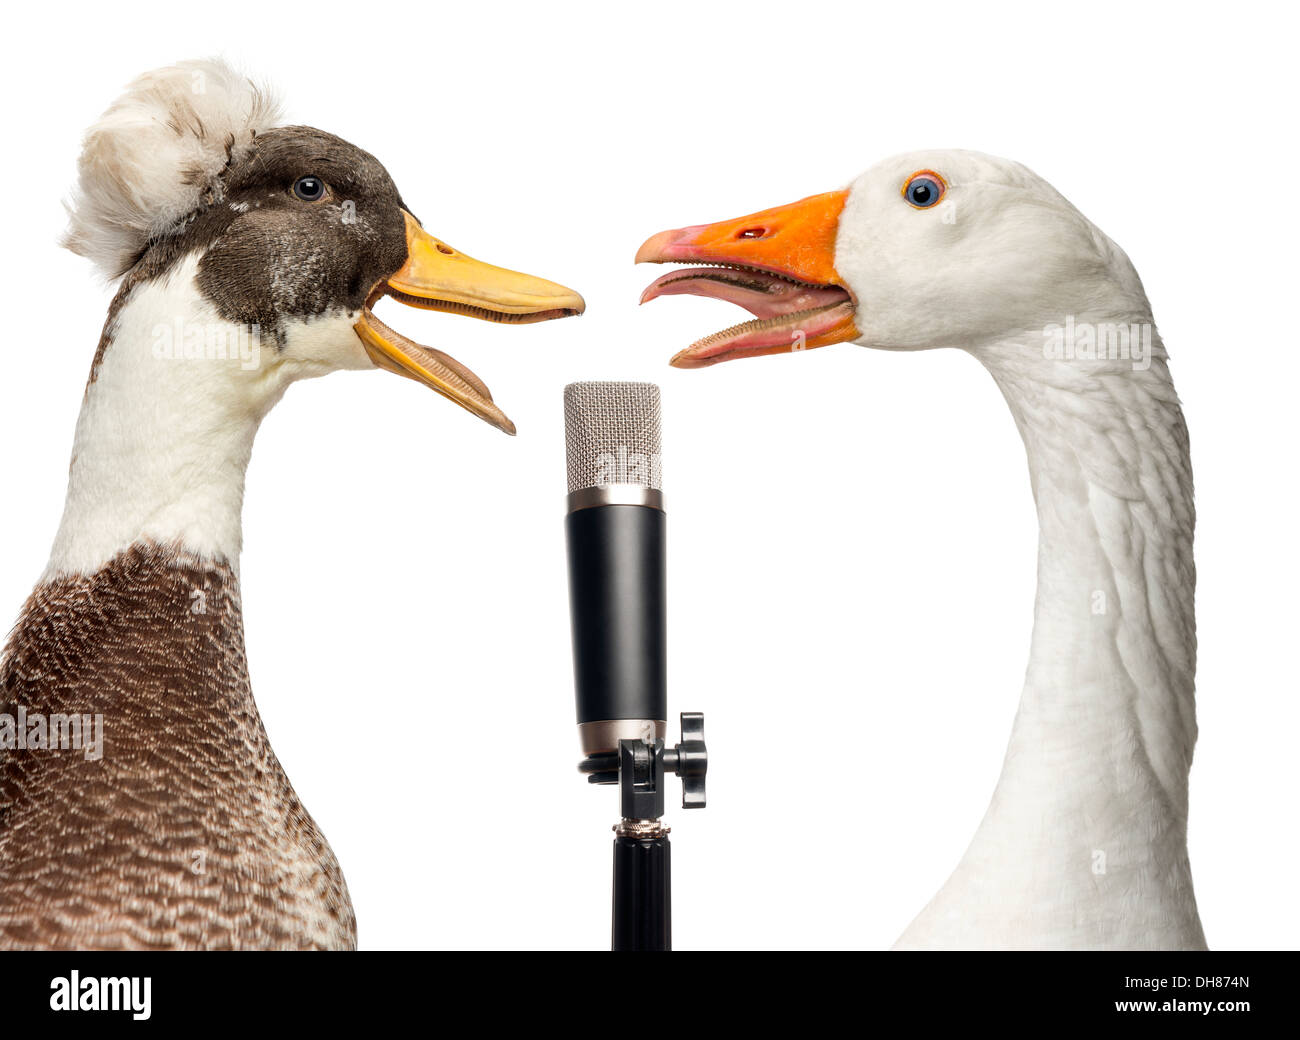 Close-up of Male Crested Duck, lophonetta specularioides, et l'oie domestique, Anser anser domesticus, singing into microphone Banque D'Images